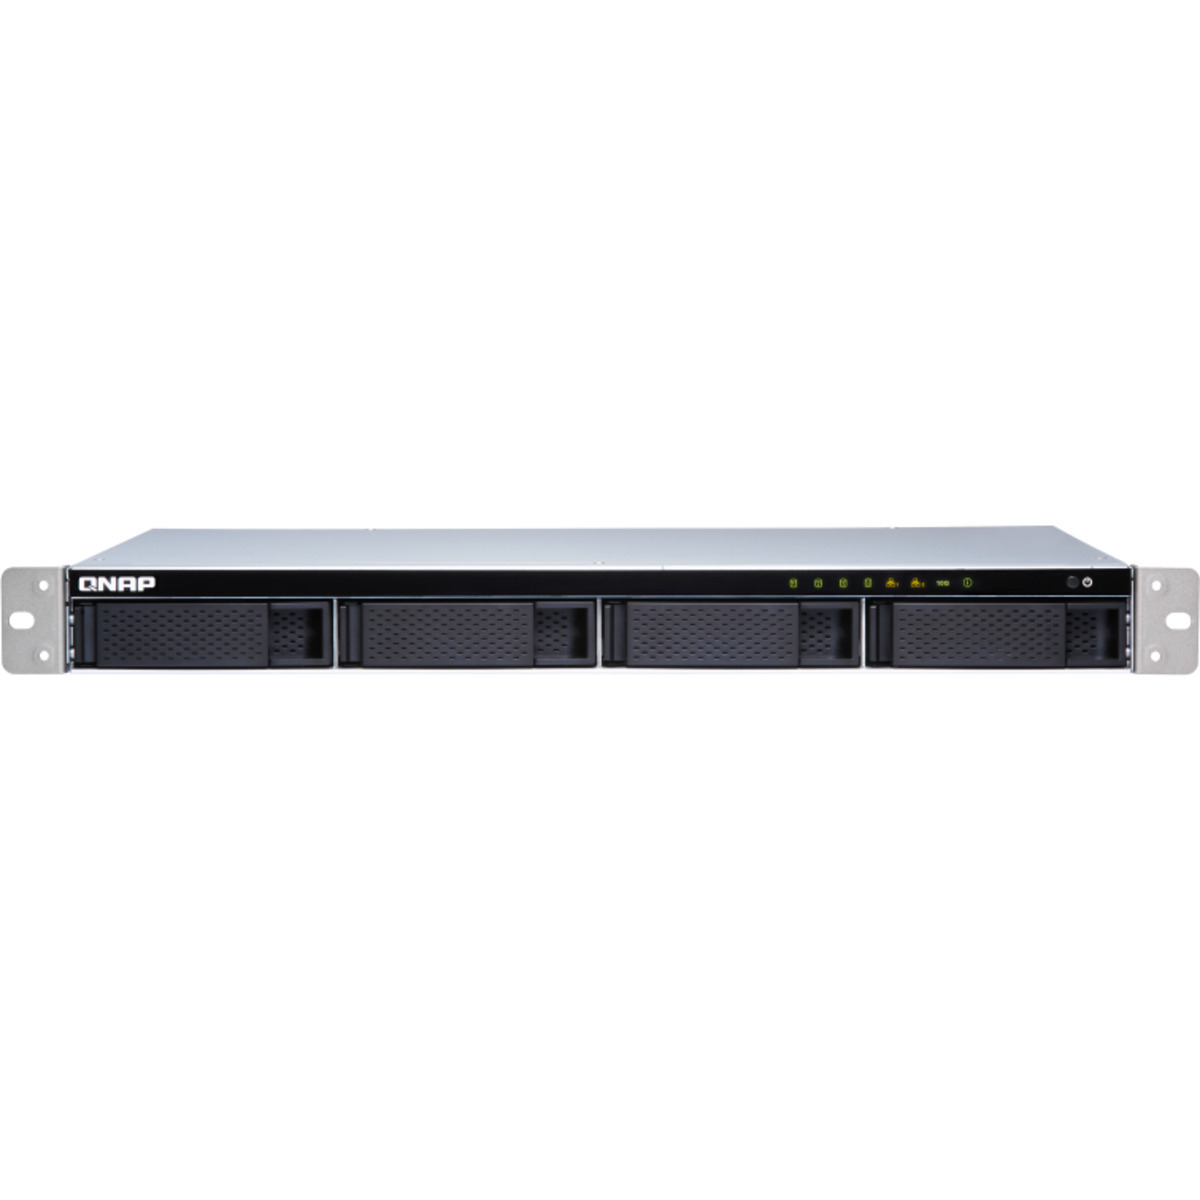 QNAP TS-431XeU 42tb 4-Bay RackMount Multimedia / Power User / Business NAS - Network Attached Storage Device 3x14tb Western Digital Red Plus WD140EFGX 3.5 7200rpm SATA 6Gb/s HDD NAS Class Drives Installed - Burn-In Tested - FREE RAM UPGRADE TS-431XeU